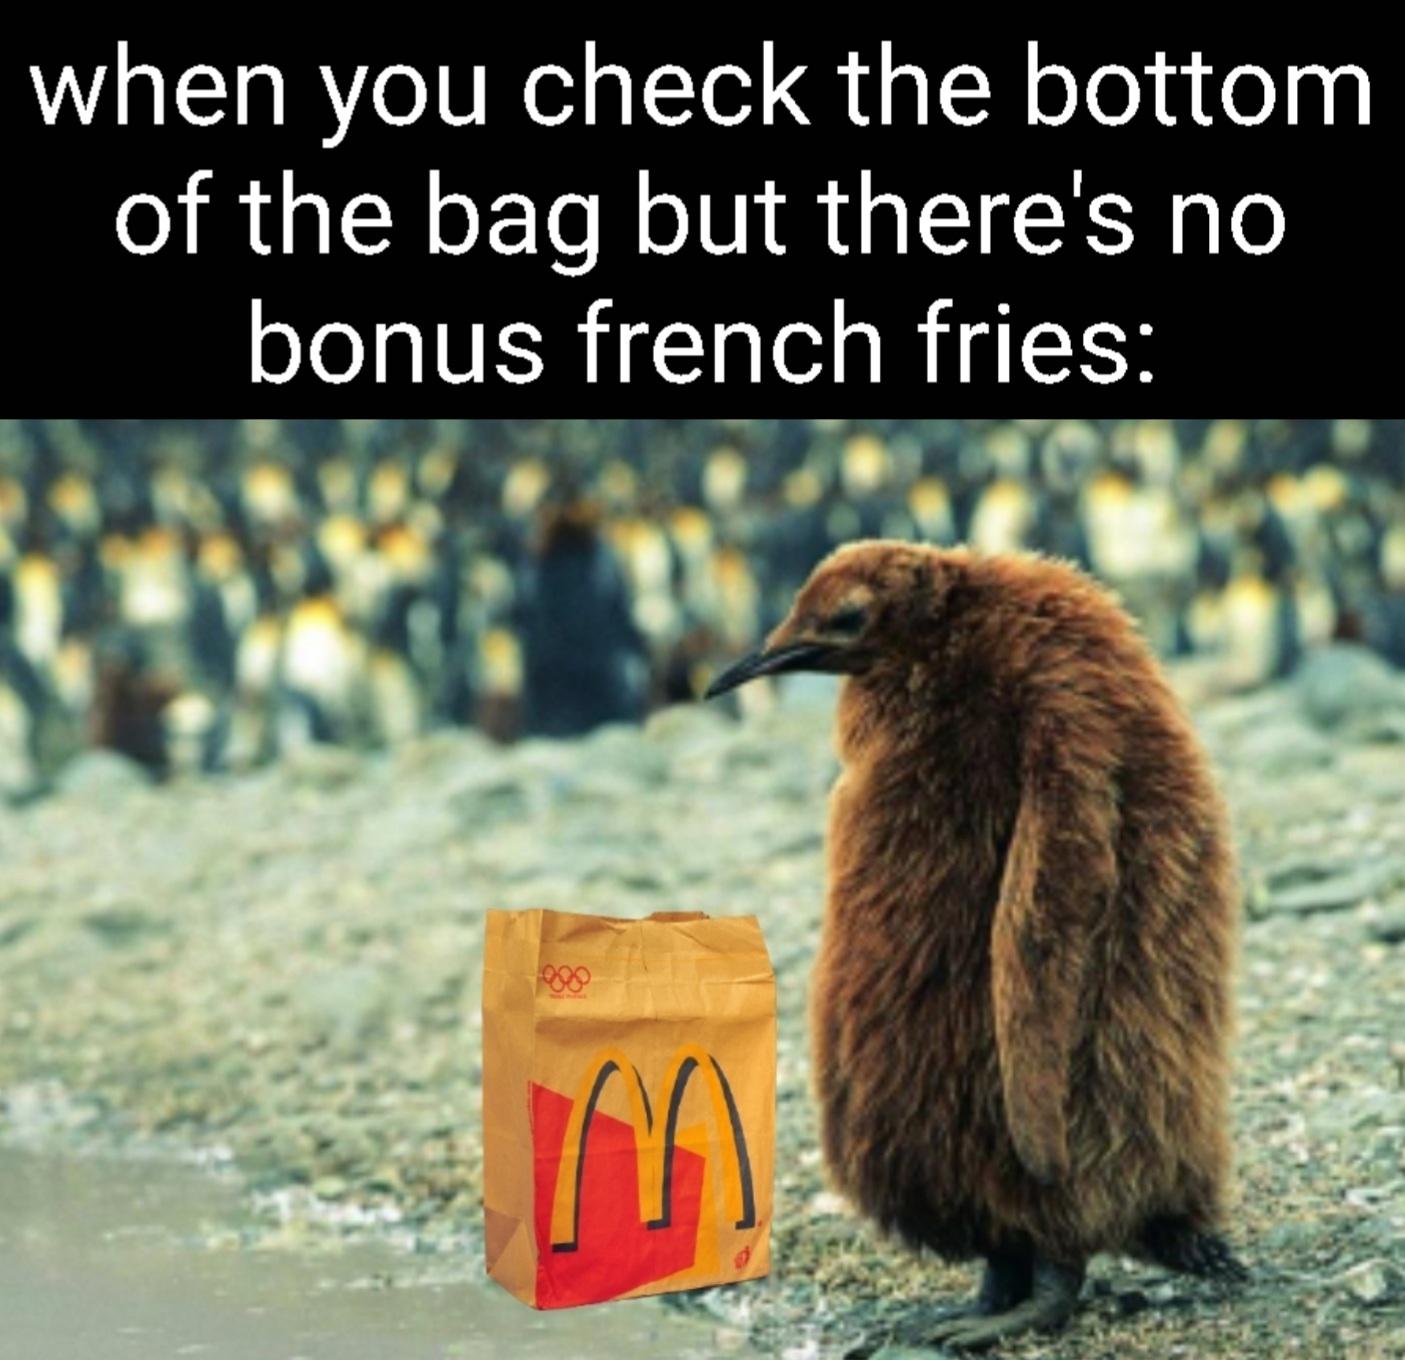 russian penguin meme - when you check the bottom of the bag but there's no bonus french fries M